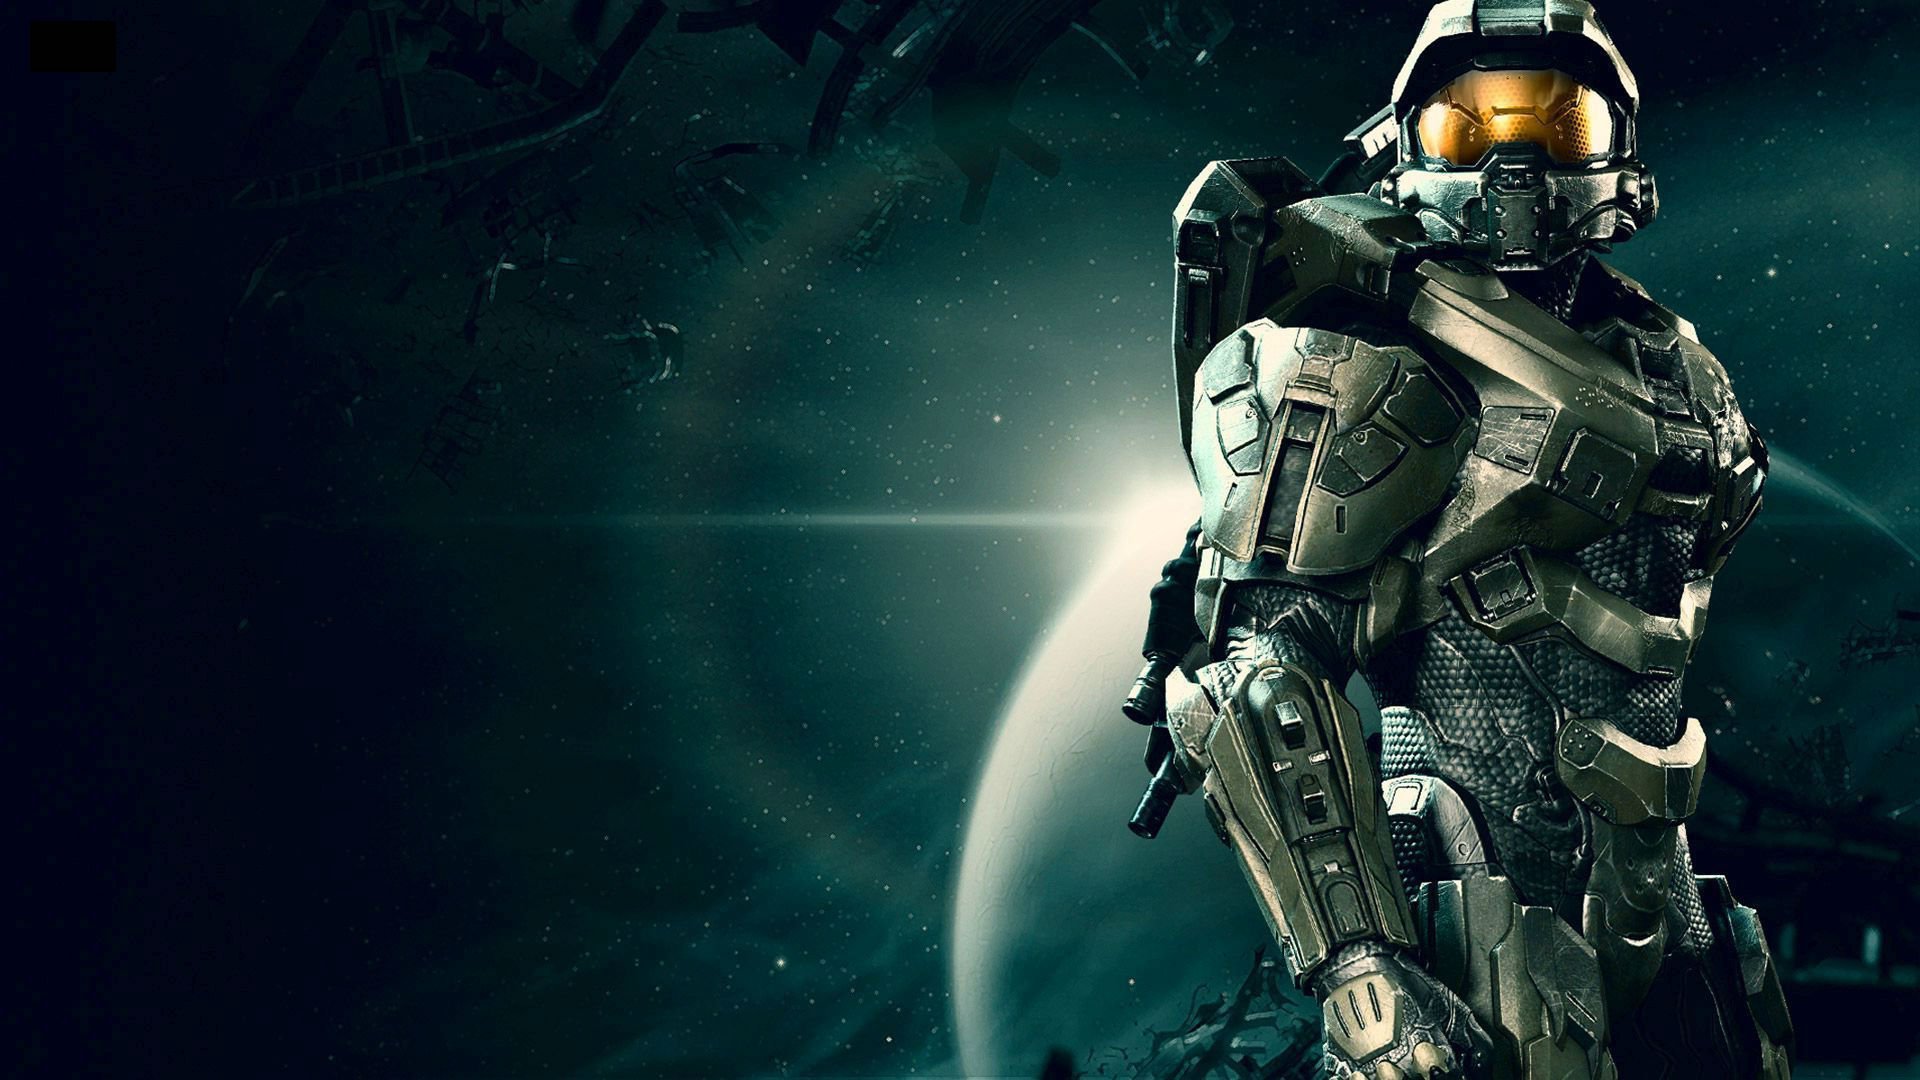 halo, Master, Chief, Collection, Sci fi, Shooter, Action, Futuristic, Fps, War, Fighting, 1halomasterchief, Space, Planet, Stars Wallpaper